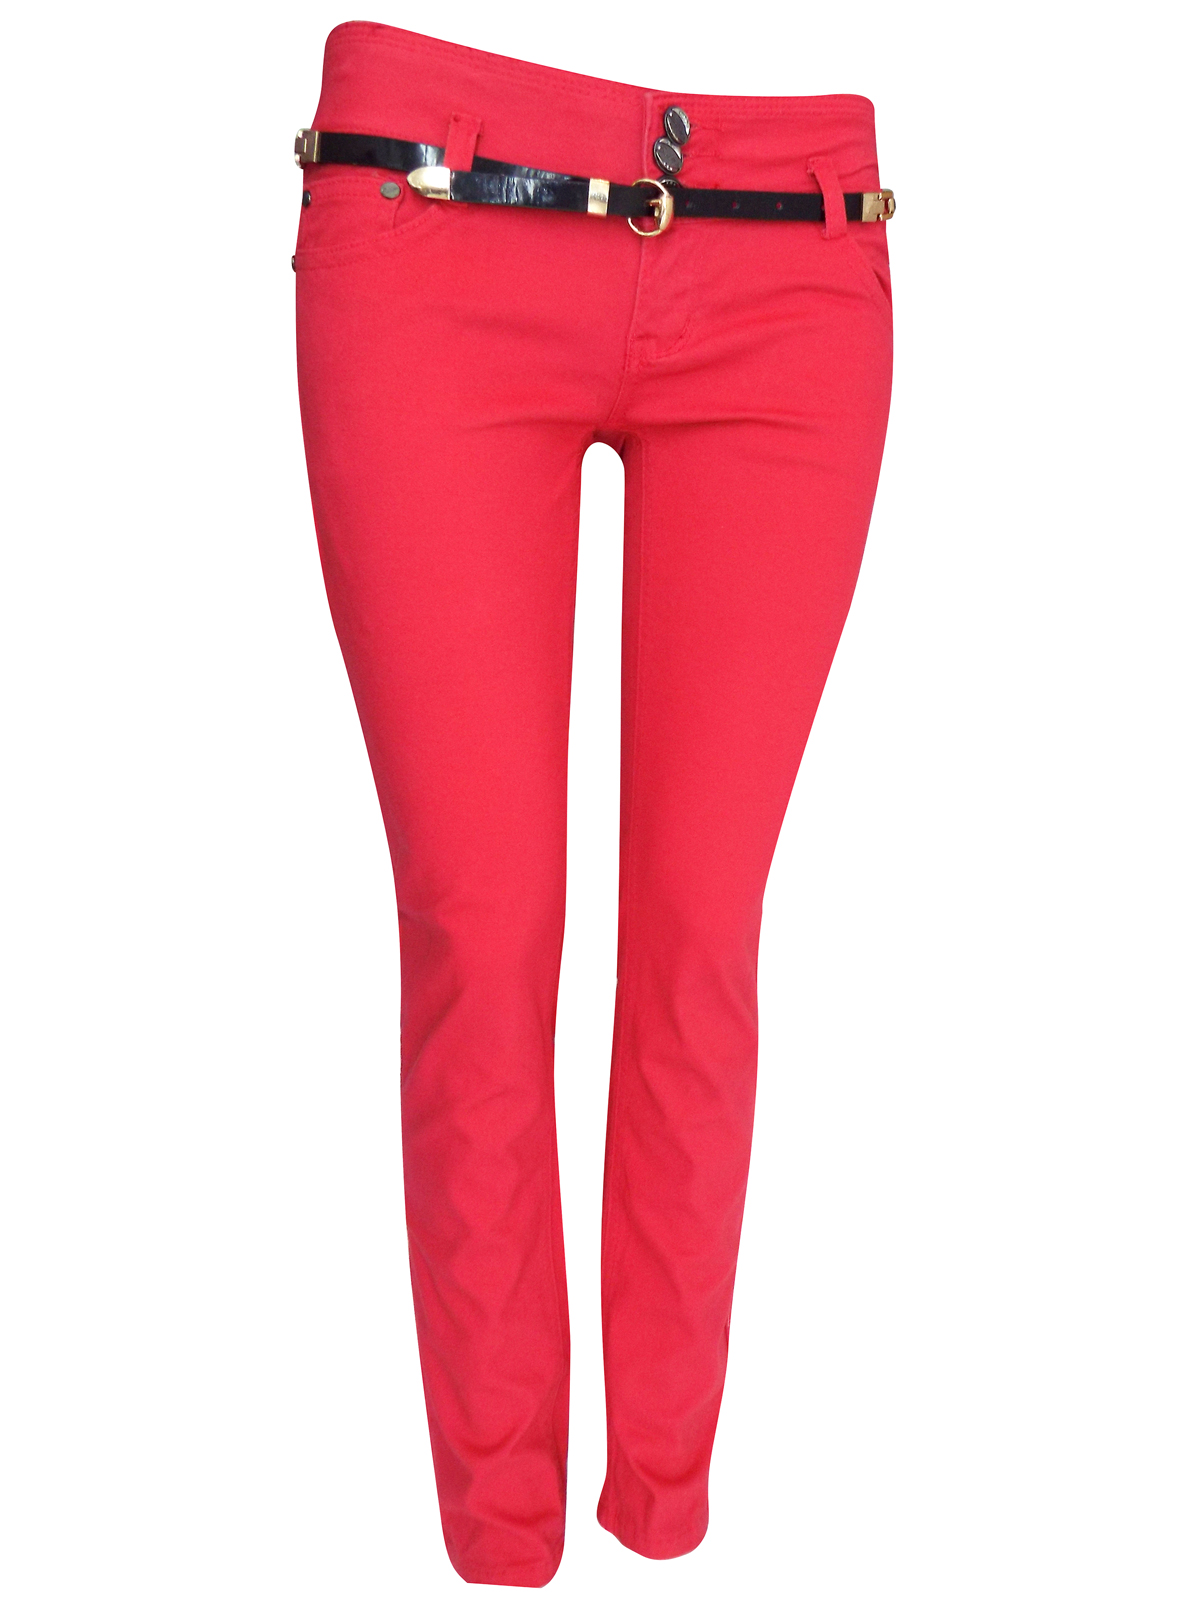 Sarah Chole - - Sarah Chole RED Low Rise Skinny Jeans with Belt - Size ...